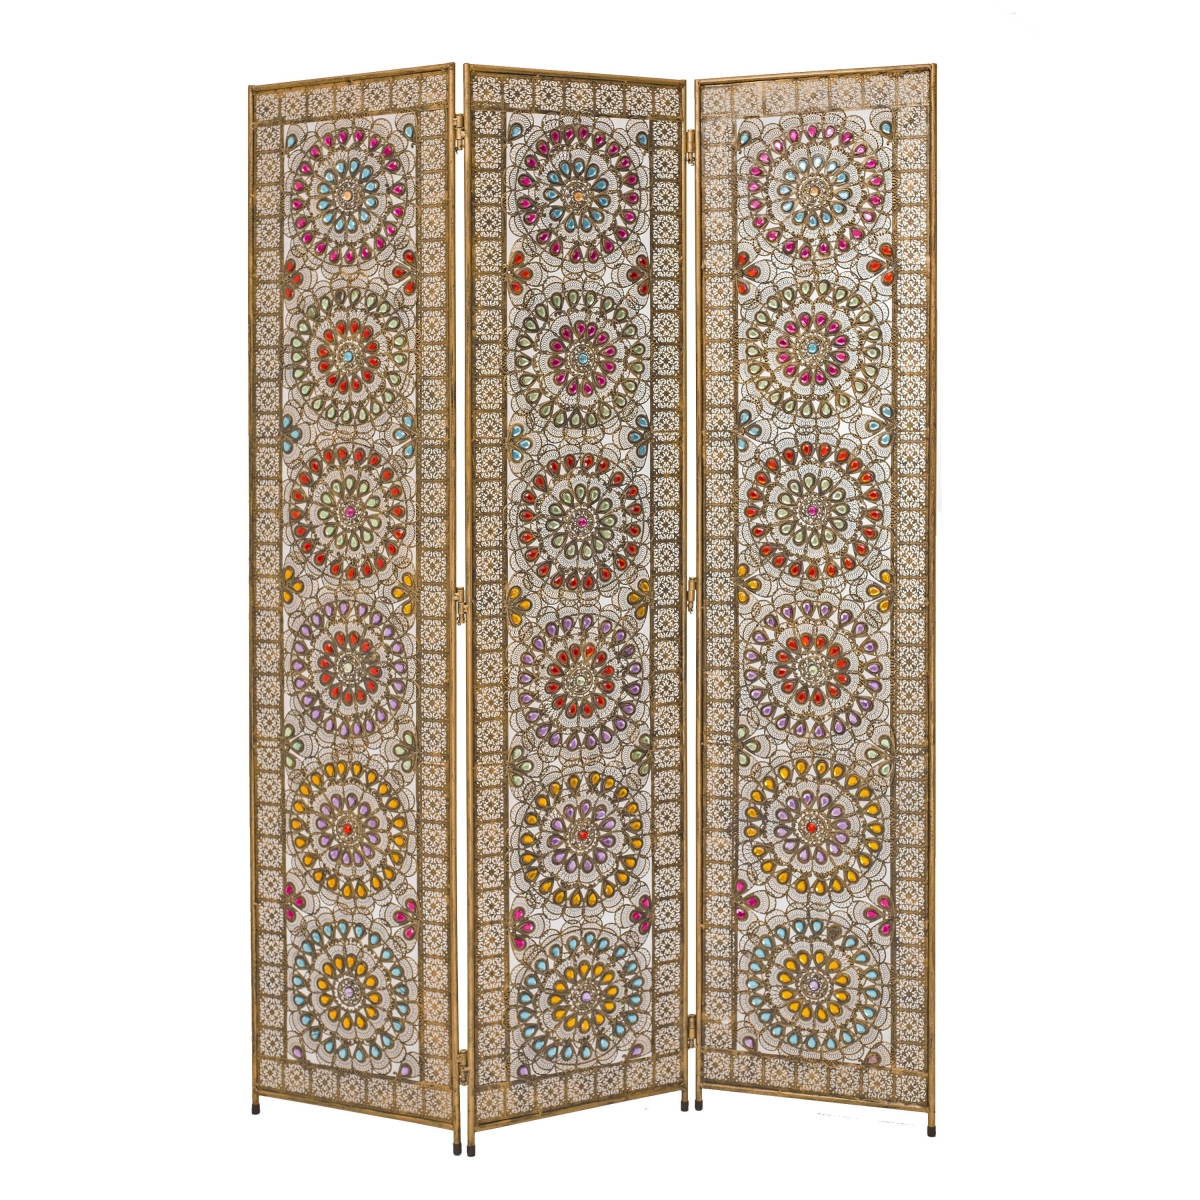 342757 68 X 1 X 48 In. Bronze Beaded Metal Mosaic Screen With 3 Panel